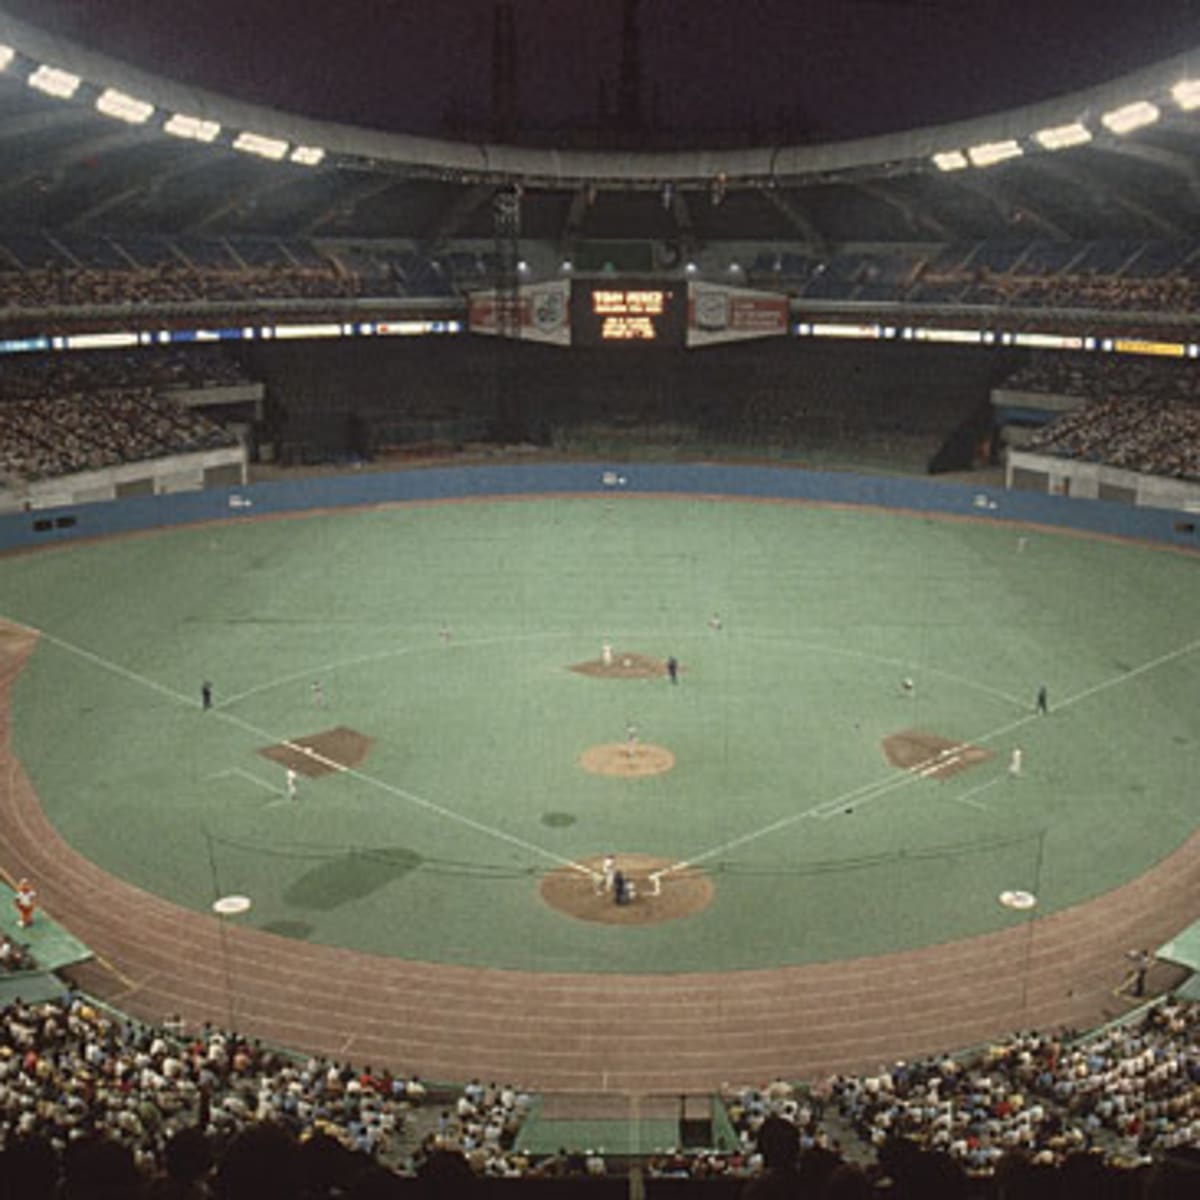 In 1977, Olympic Stadium replaced Jarry Park as the home of the